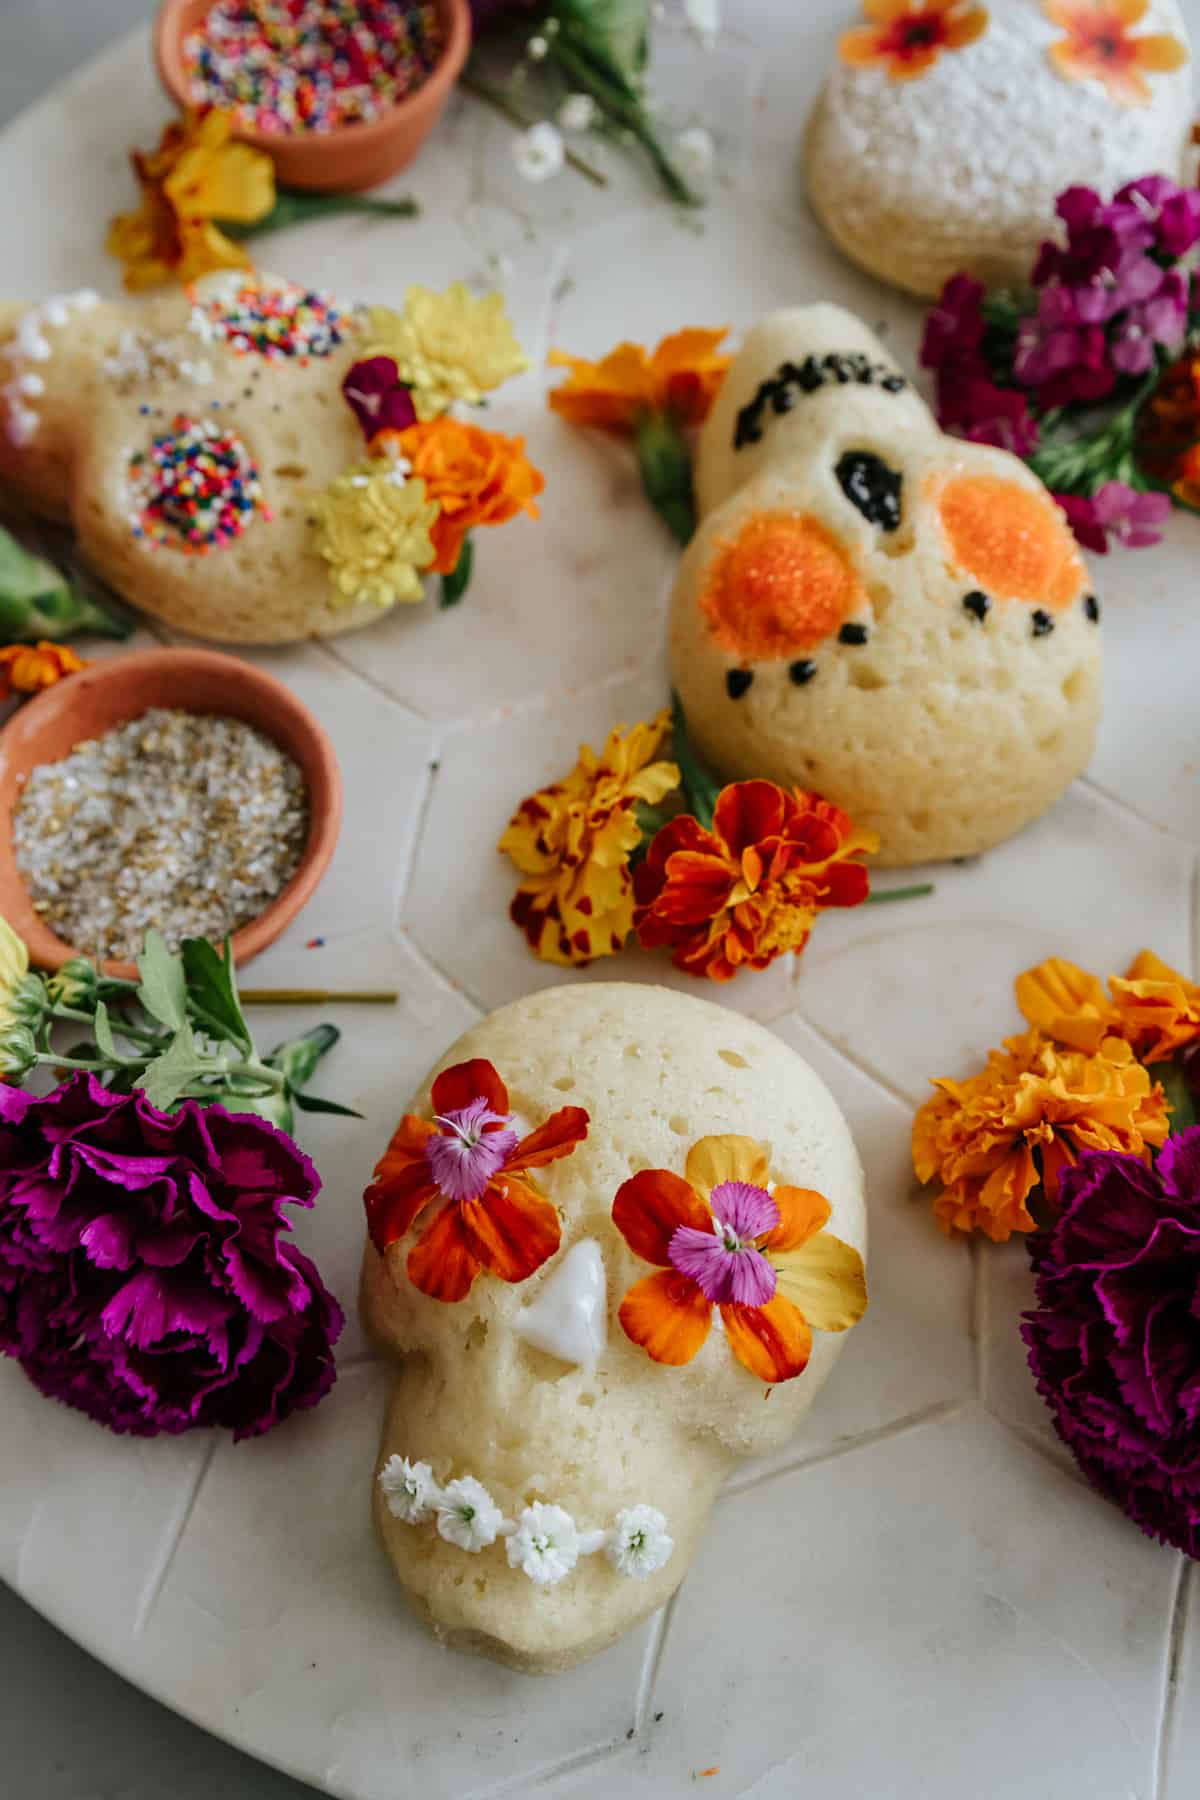 mini lemon sugar skull cake with edible orange flowers for eyes and edible tiny white flowers for a mouth.